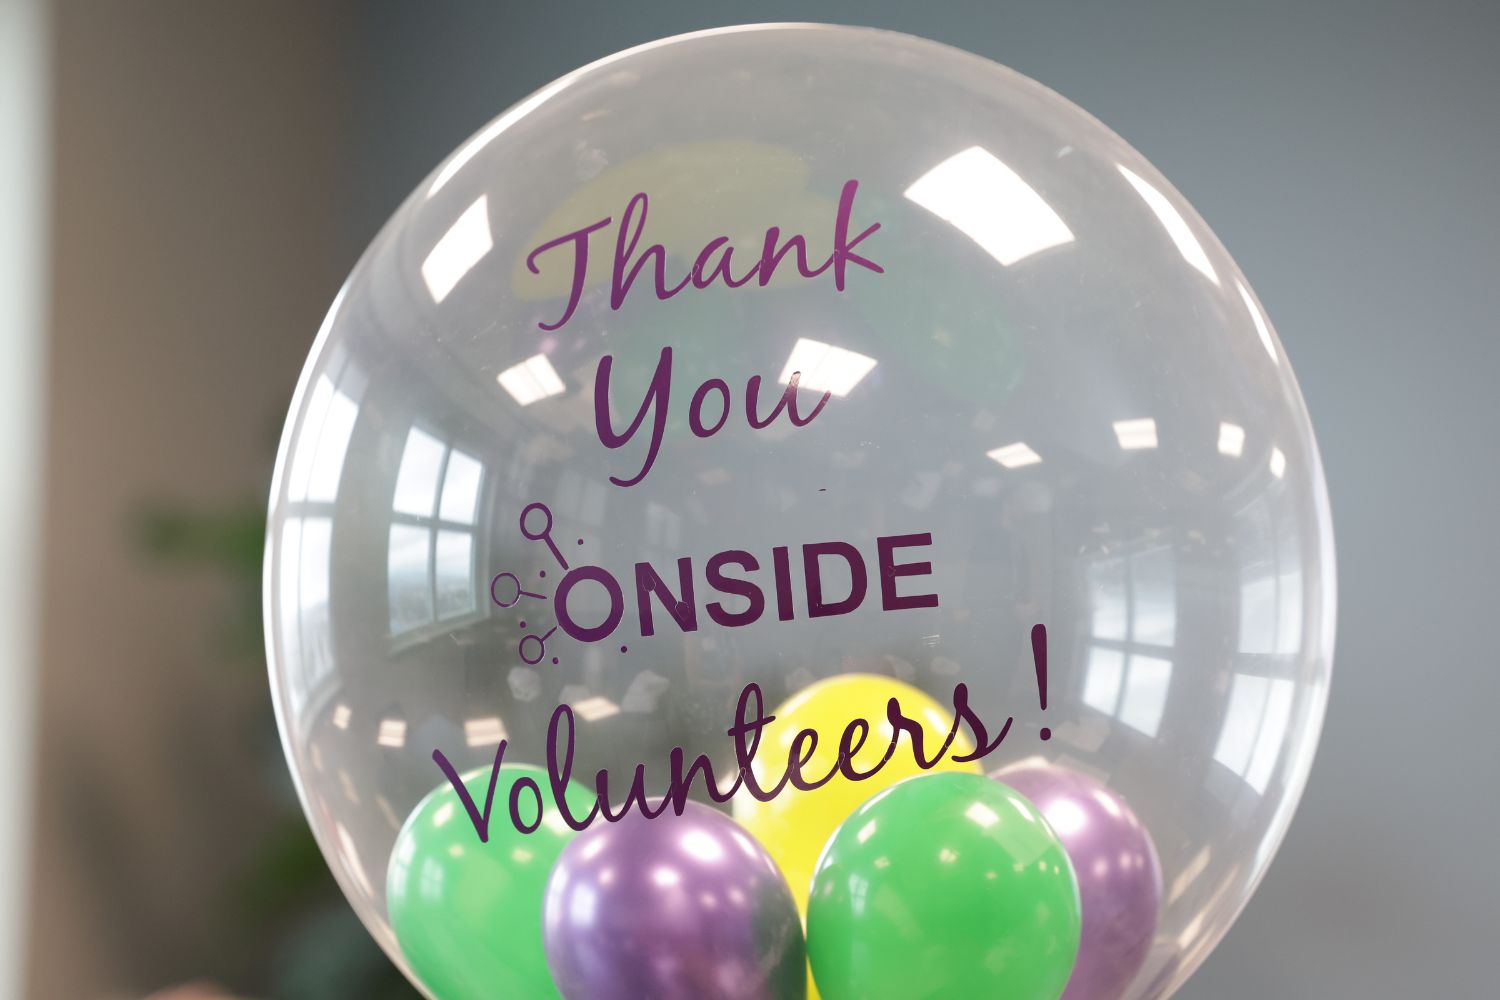 The photograph shows a close up shot of a transparent balloon with smaller coloured balloons inside it, the caption on the balloon says Thank You ONSIDE Volunteers!